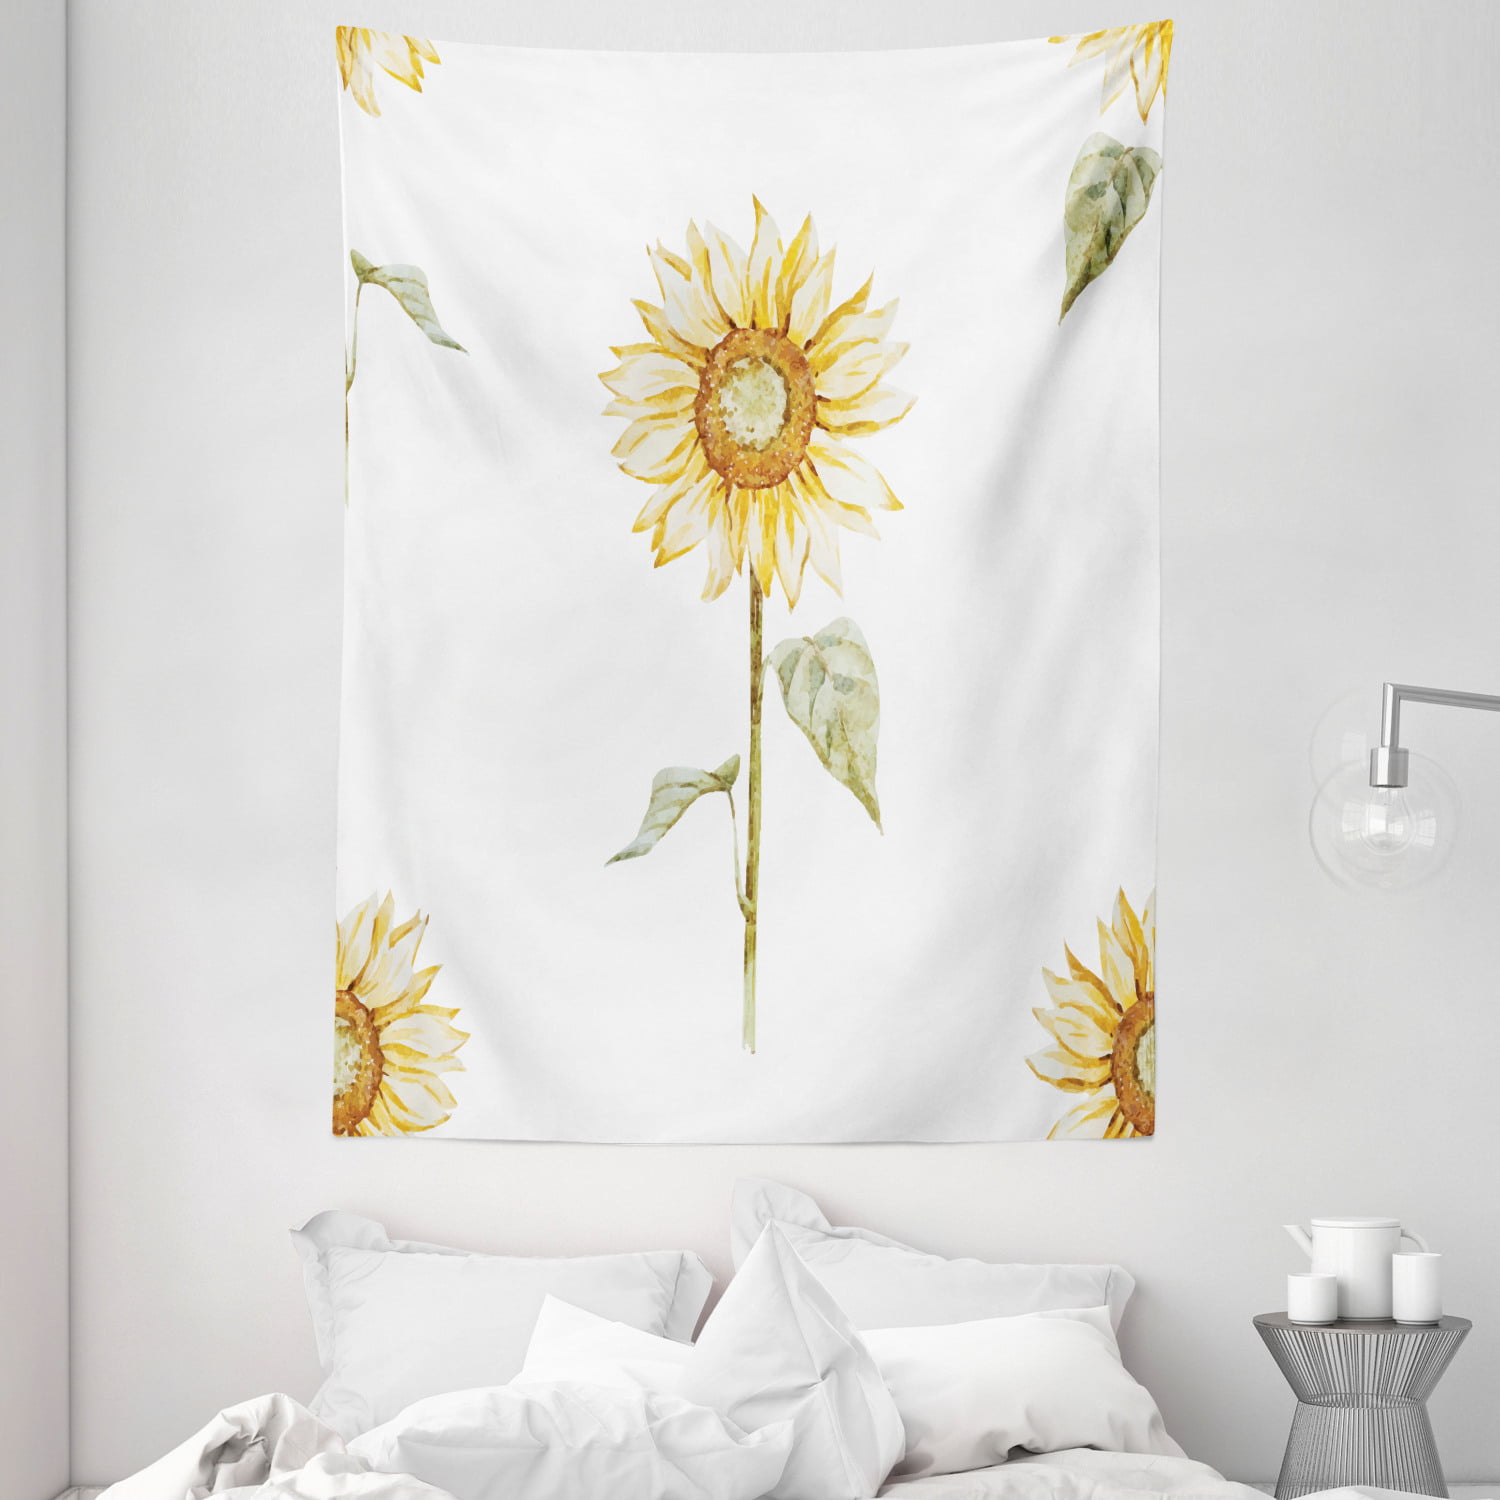 Sunflower Decor Wall Hanging Tapestry, Sunflowers in Watercolor ...